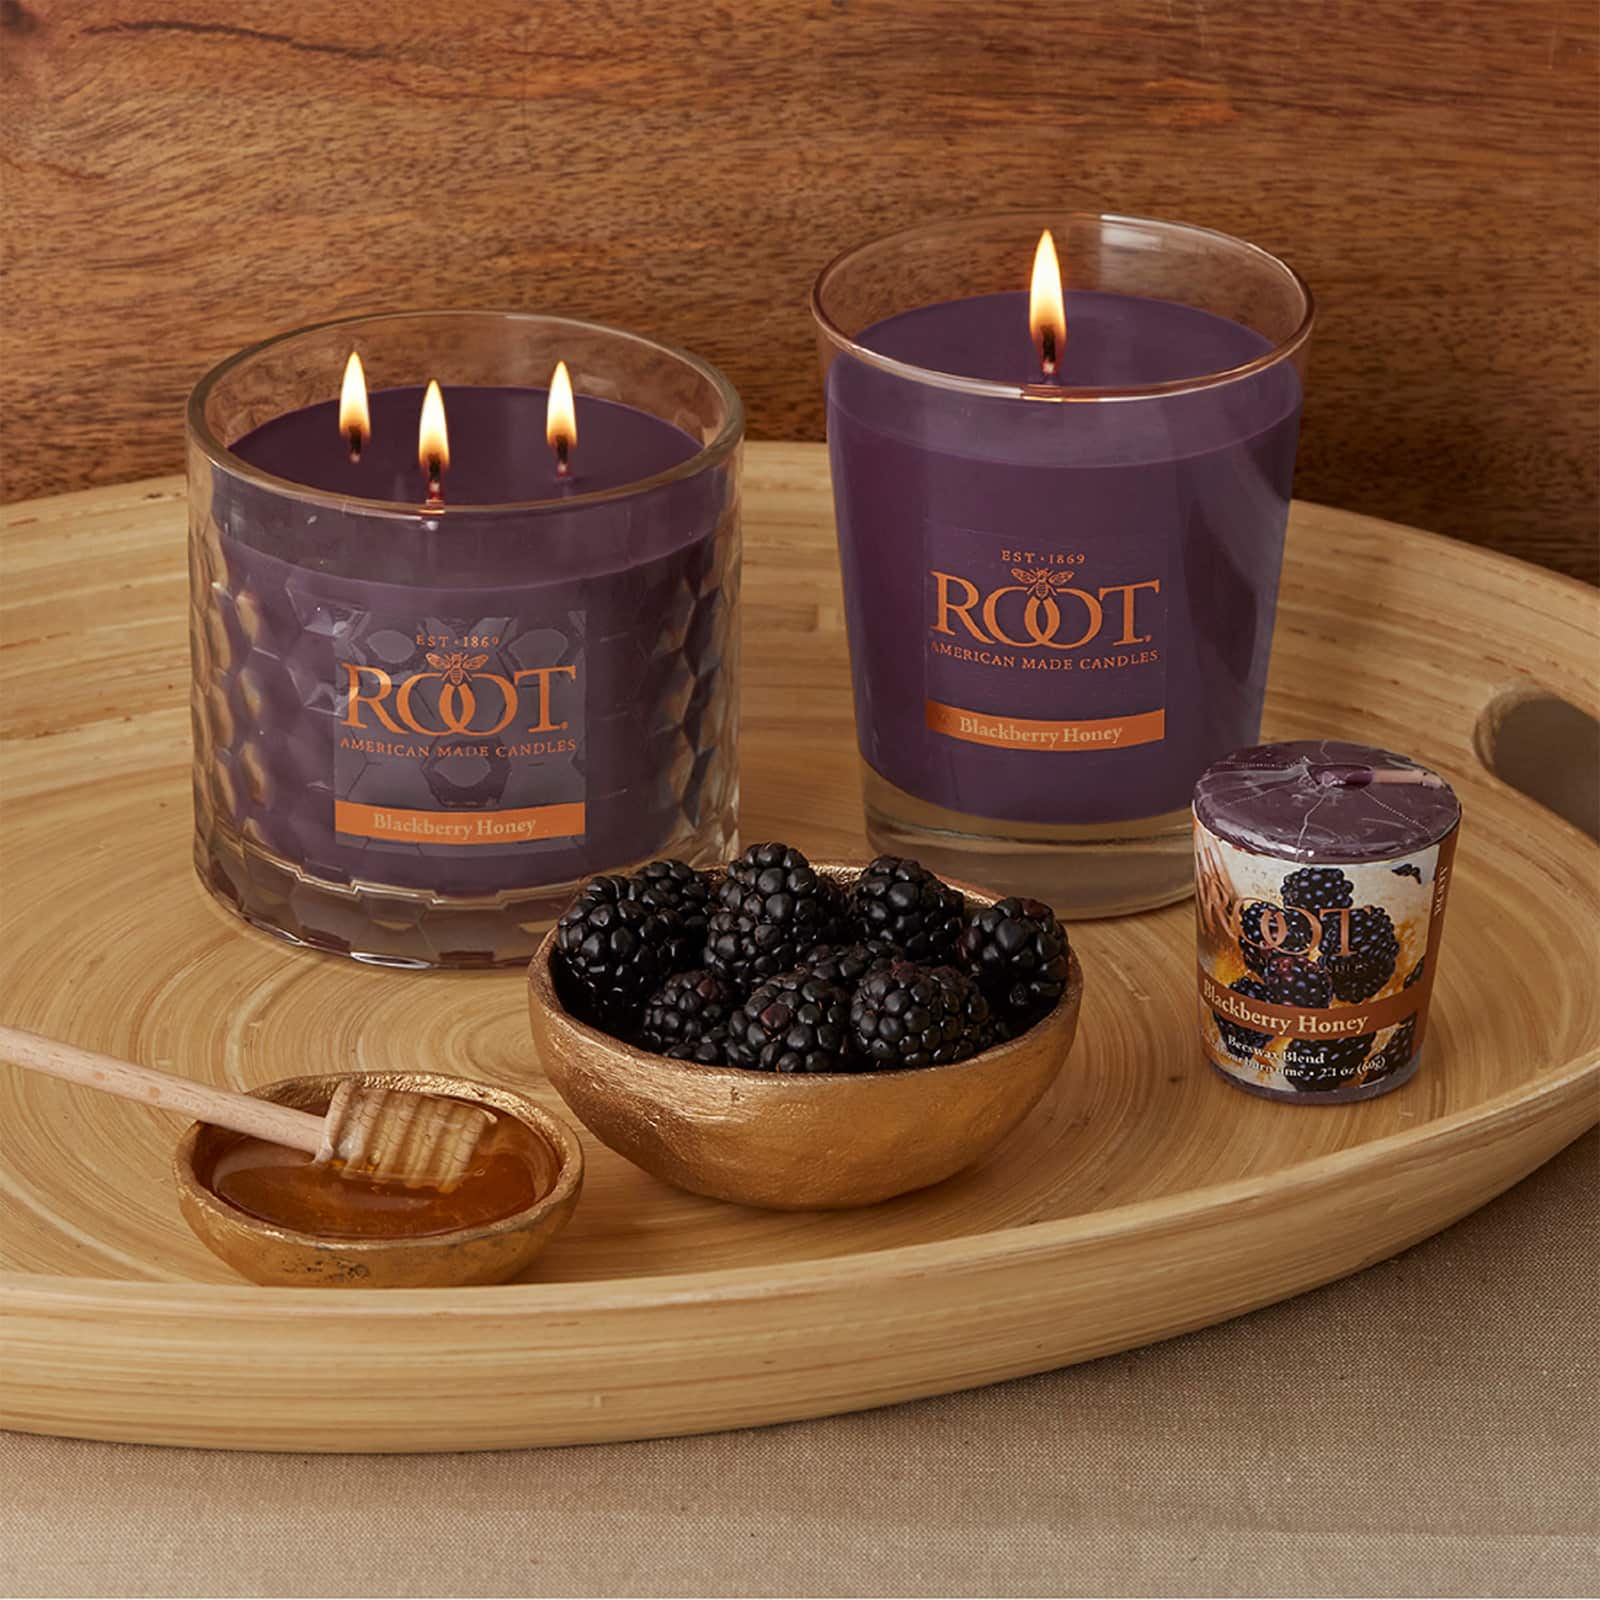 Root Candles Signature 3-Wick Honeycomb Beeswax Blend Jar Candle